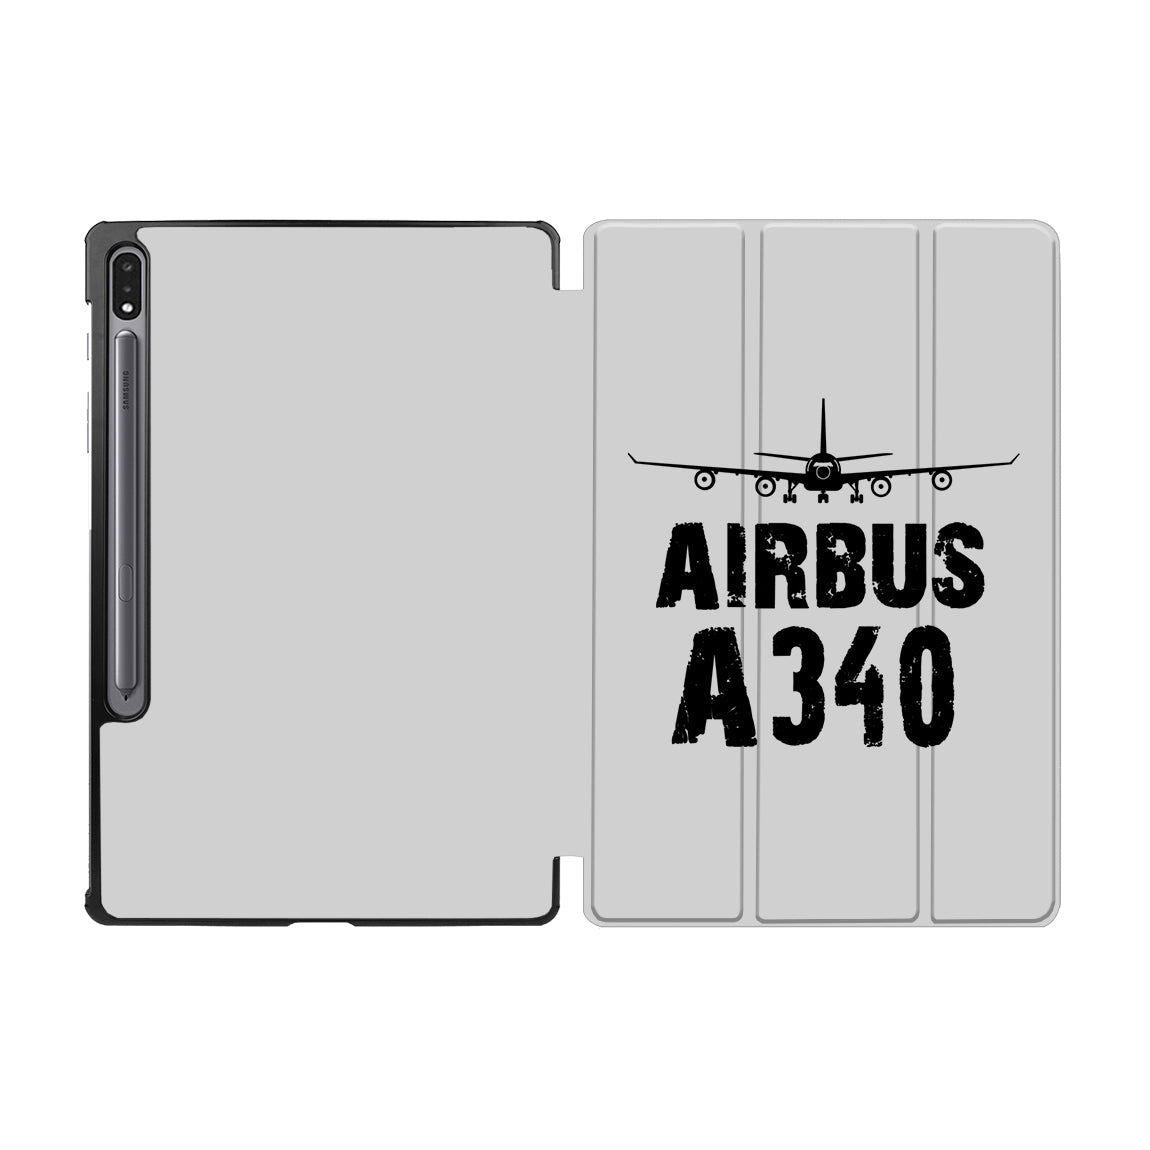 Airbus A340 & Plane Designed Samsung Tablet Cases